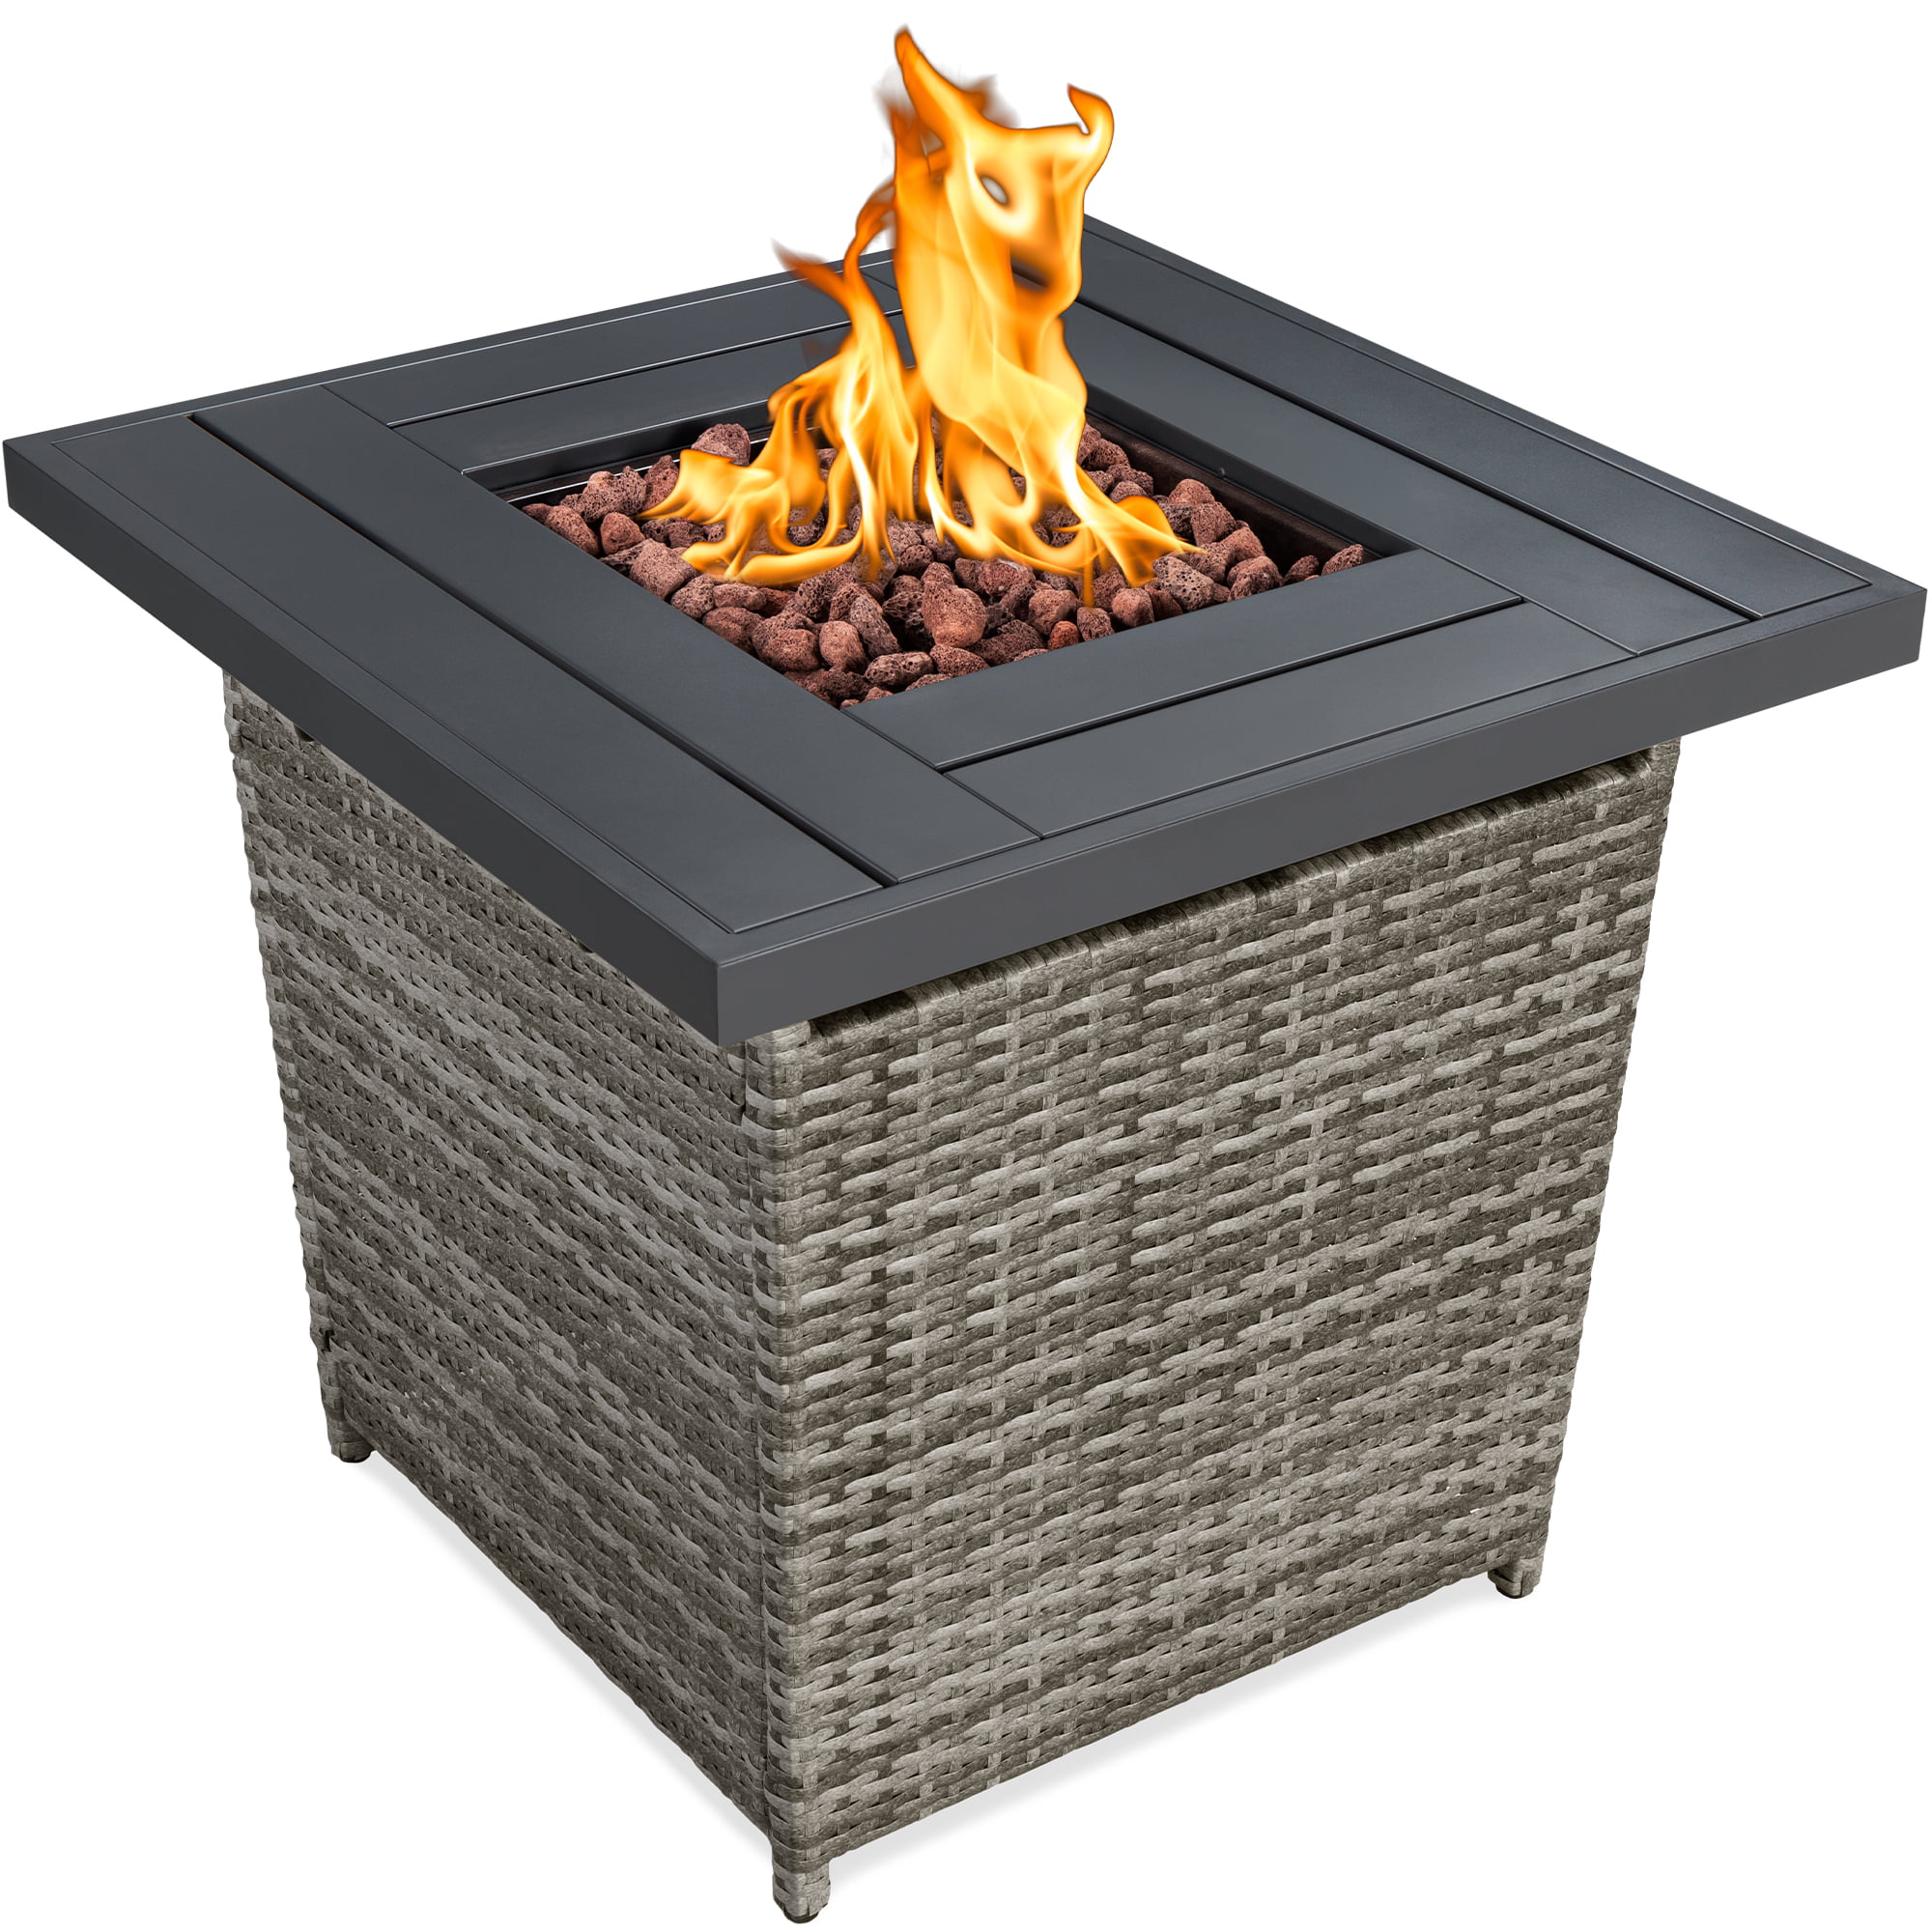 Best Choice Products 28in Fire Pit Table 50,000 BTU Outdoor Wicker Patio w/ Lava Rocks, Cover, Tank Holder  Ash Gray